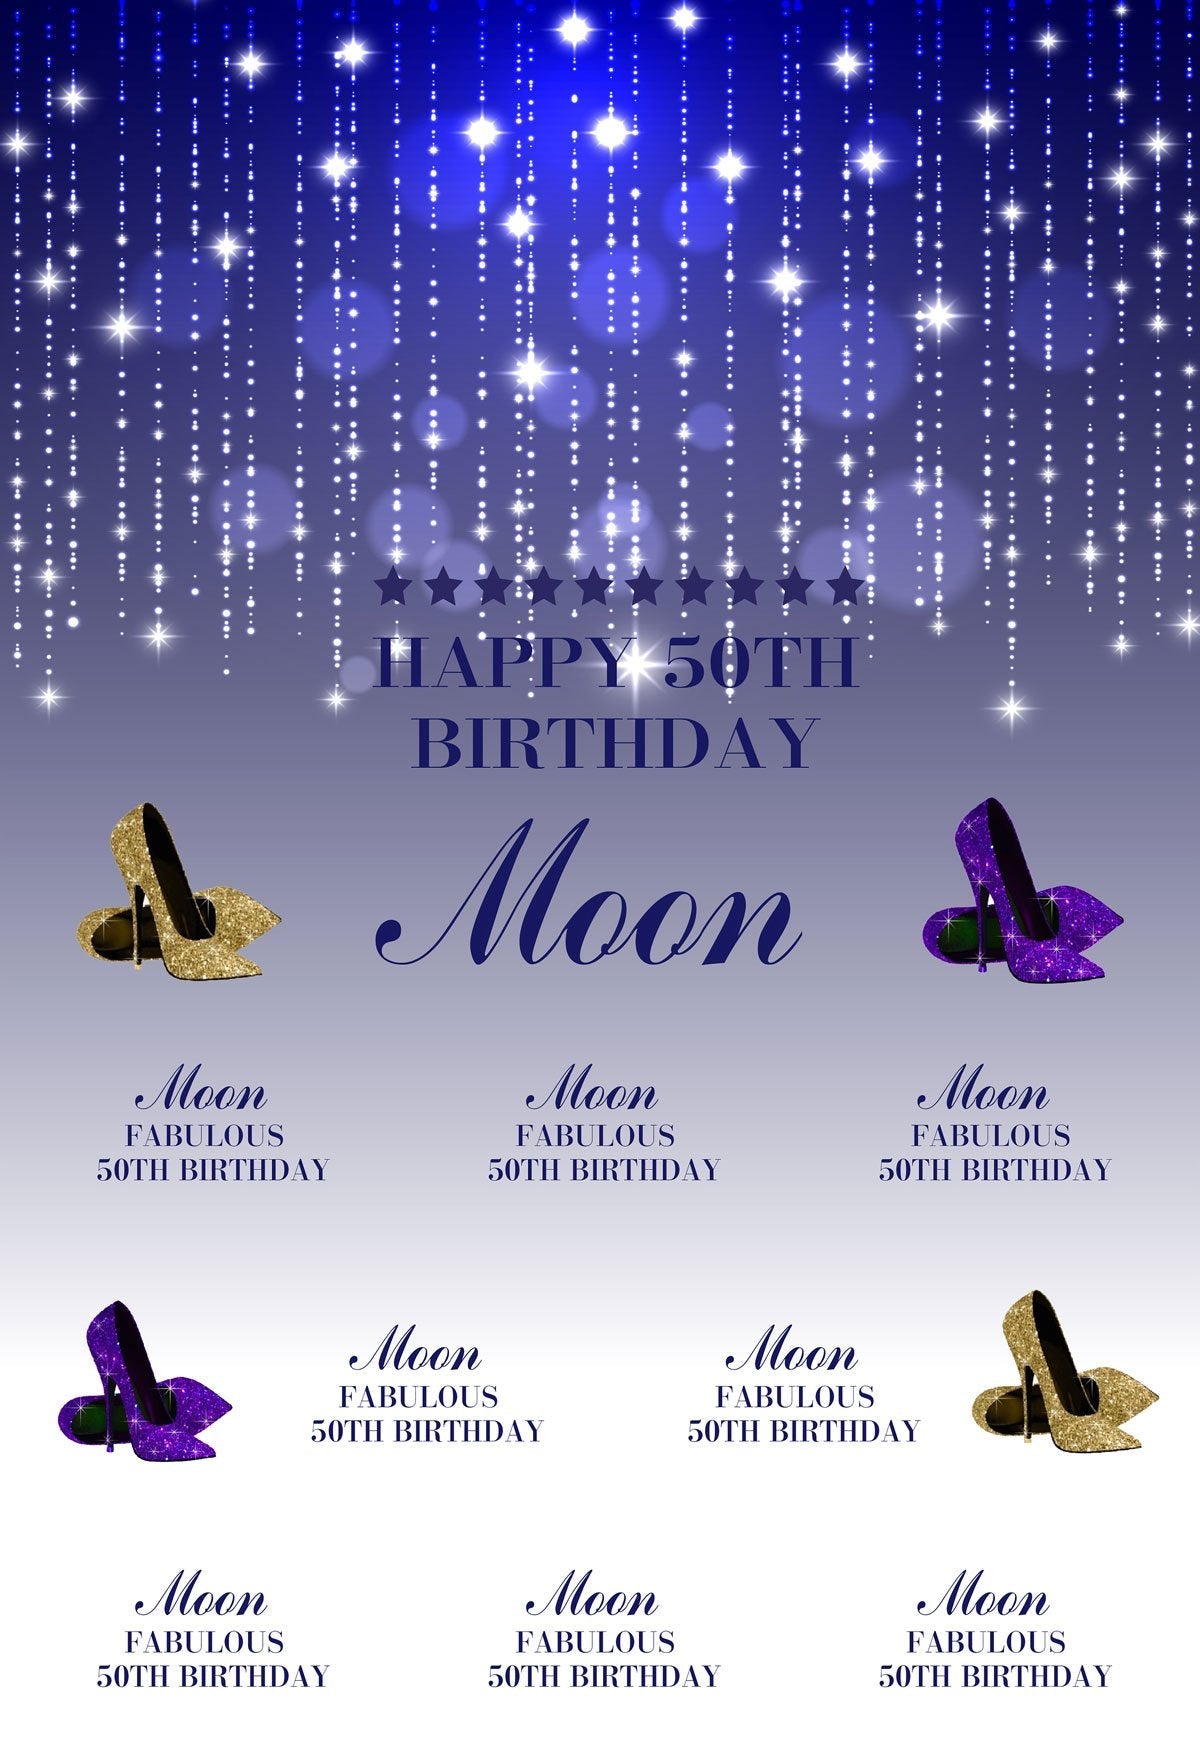 Katebackdrop：Kate 50th Birthday Party shiny Blue and White Backdrop with Purple and Golden high-heeled shoes Step and Repeat